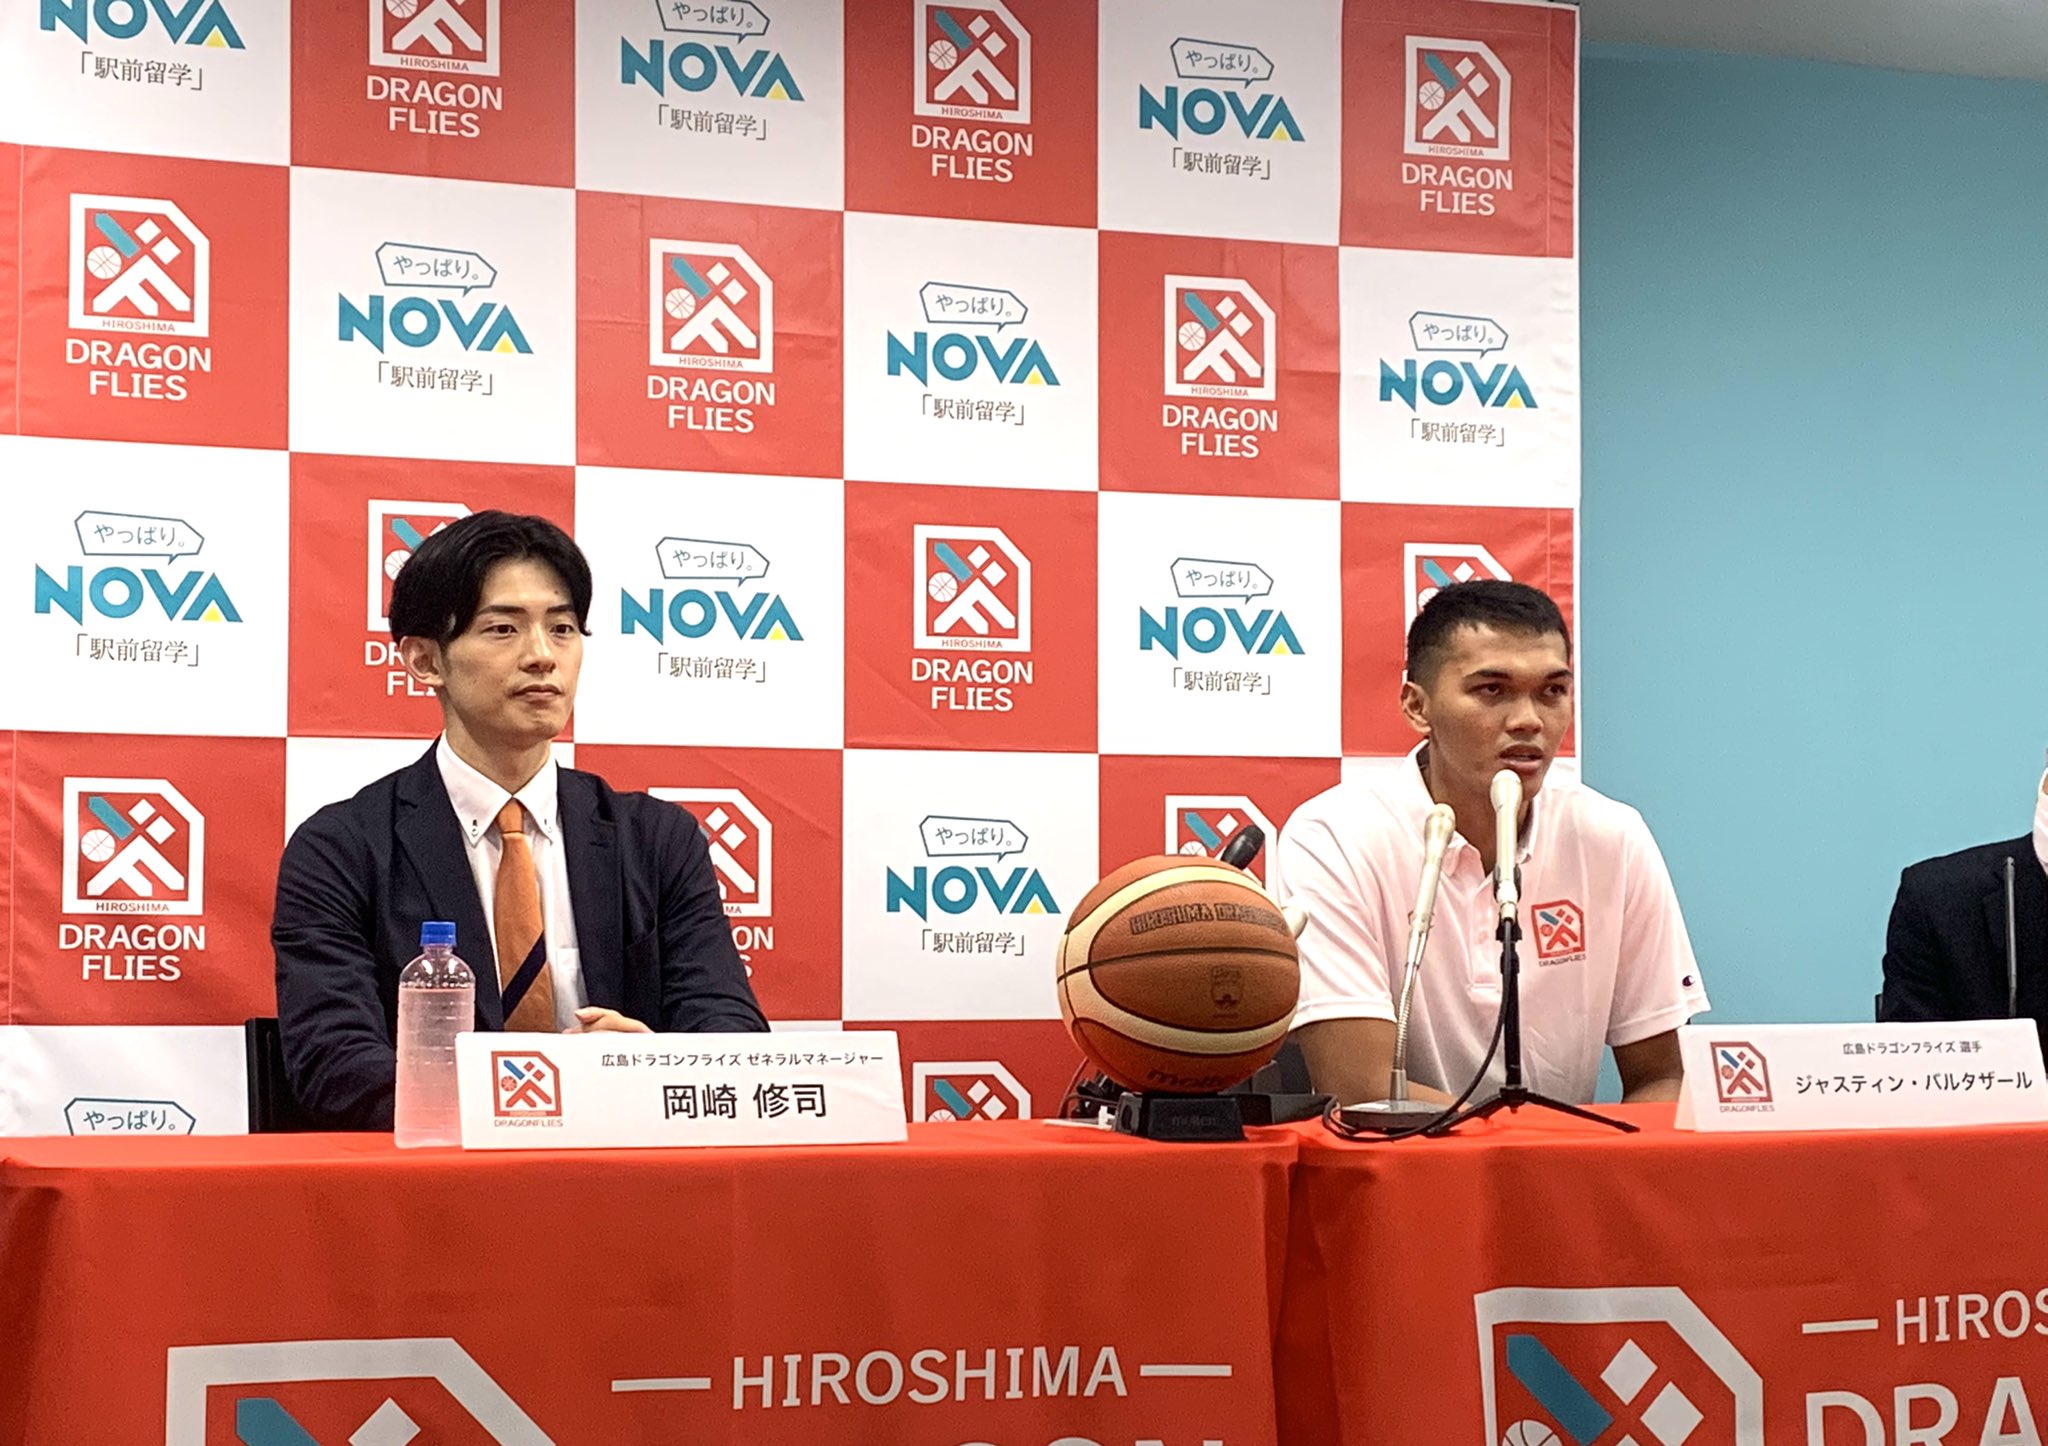 Justine Baltazar during an introductory press conference with Hiroshima Dragonflies in the Japan B.League.